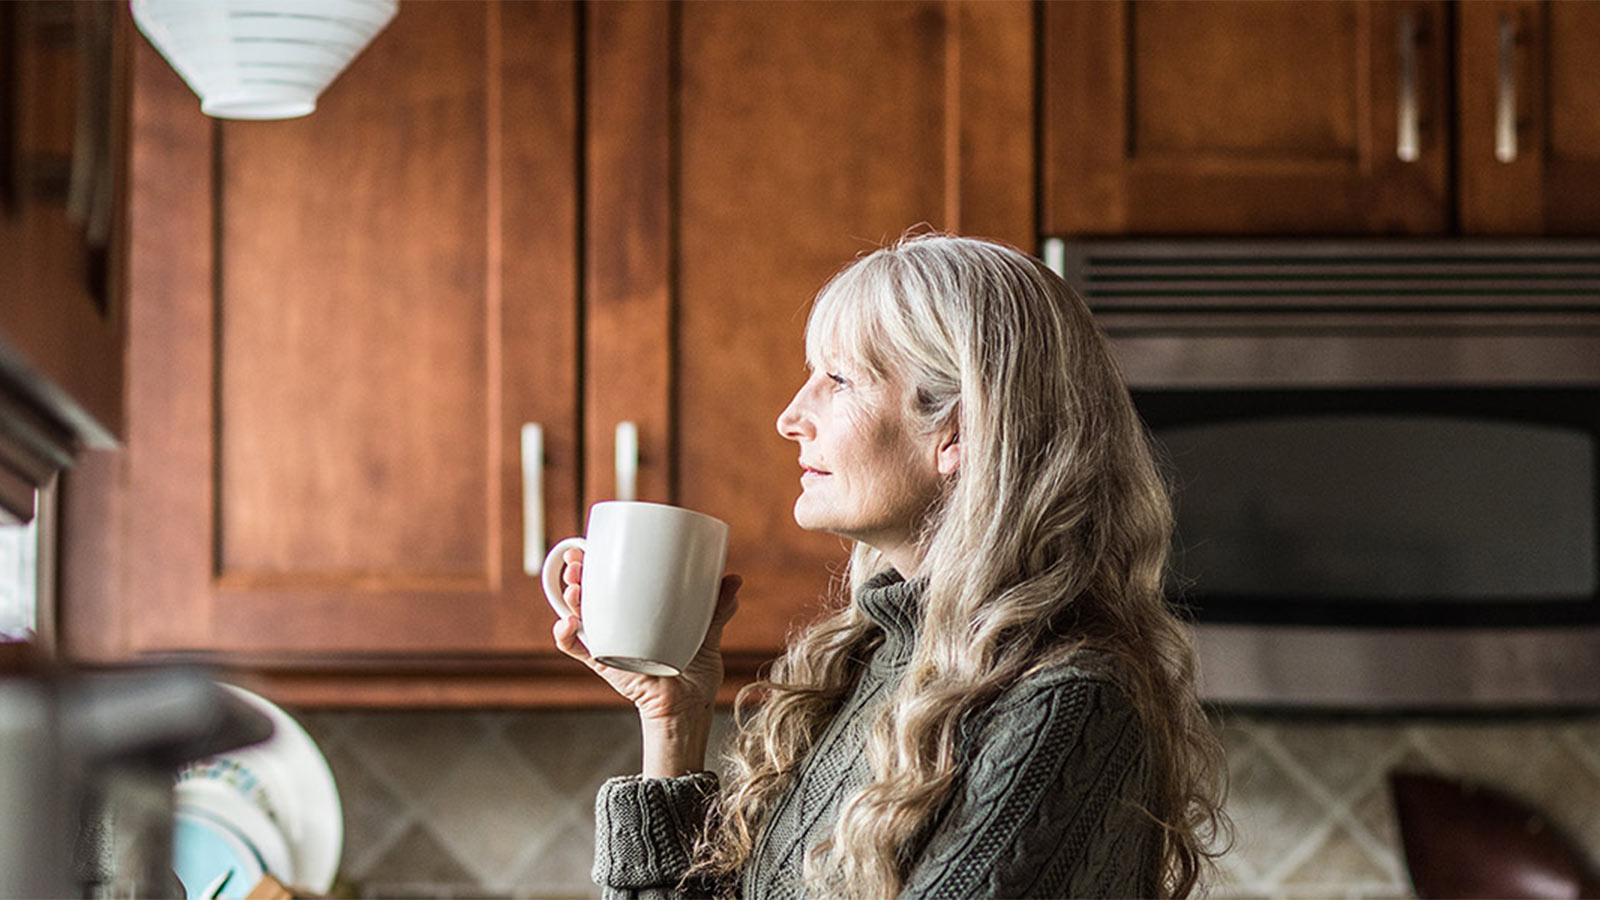 Woman standing in her kitchen holding a white mug and staring out the window.